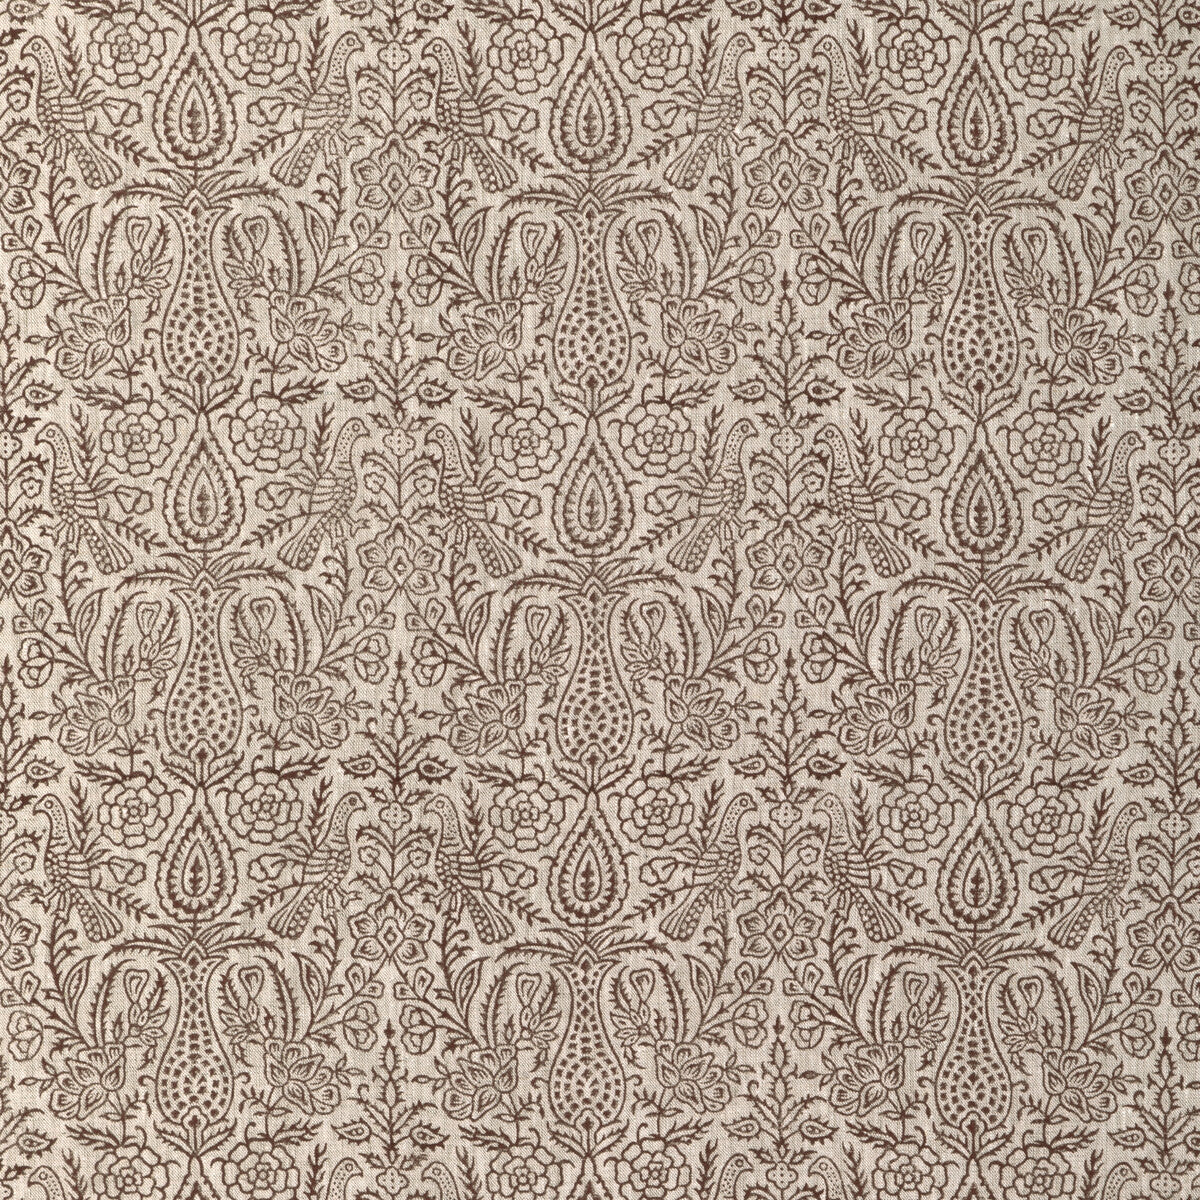 Haven Handblock fabric in java color - pattern 2023101.6.0 - by Lee Jofa in the Clare Prints collection